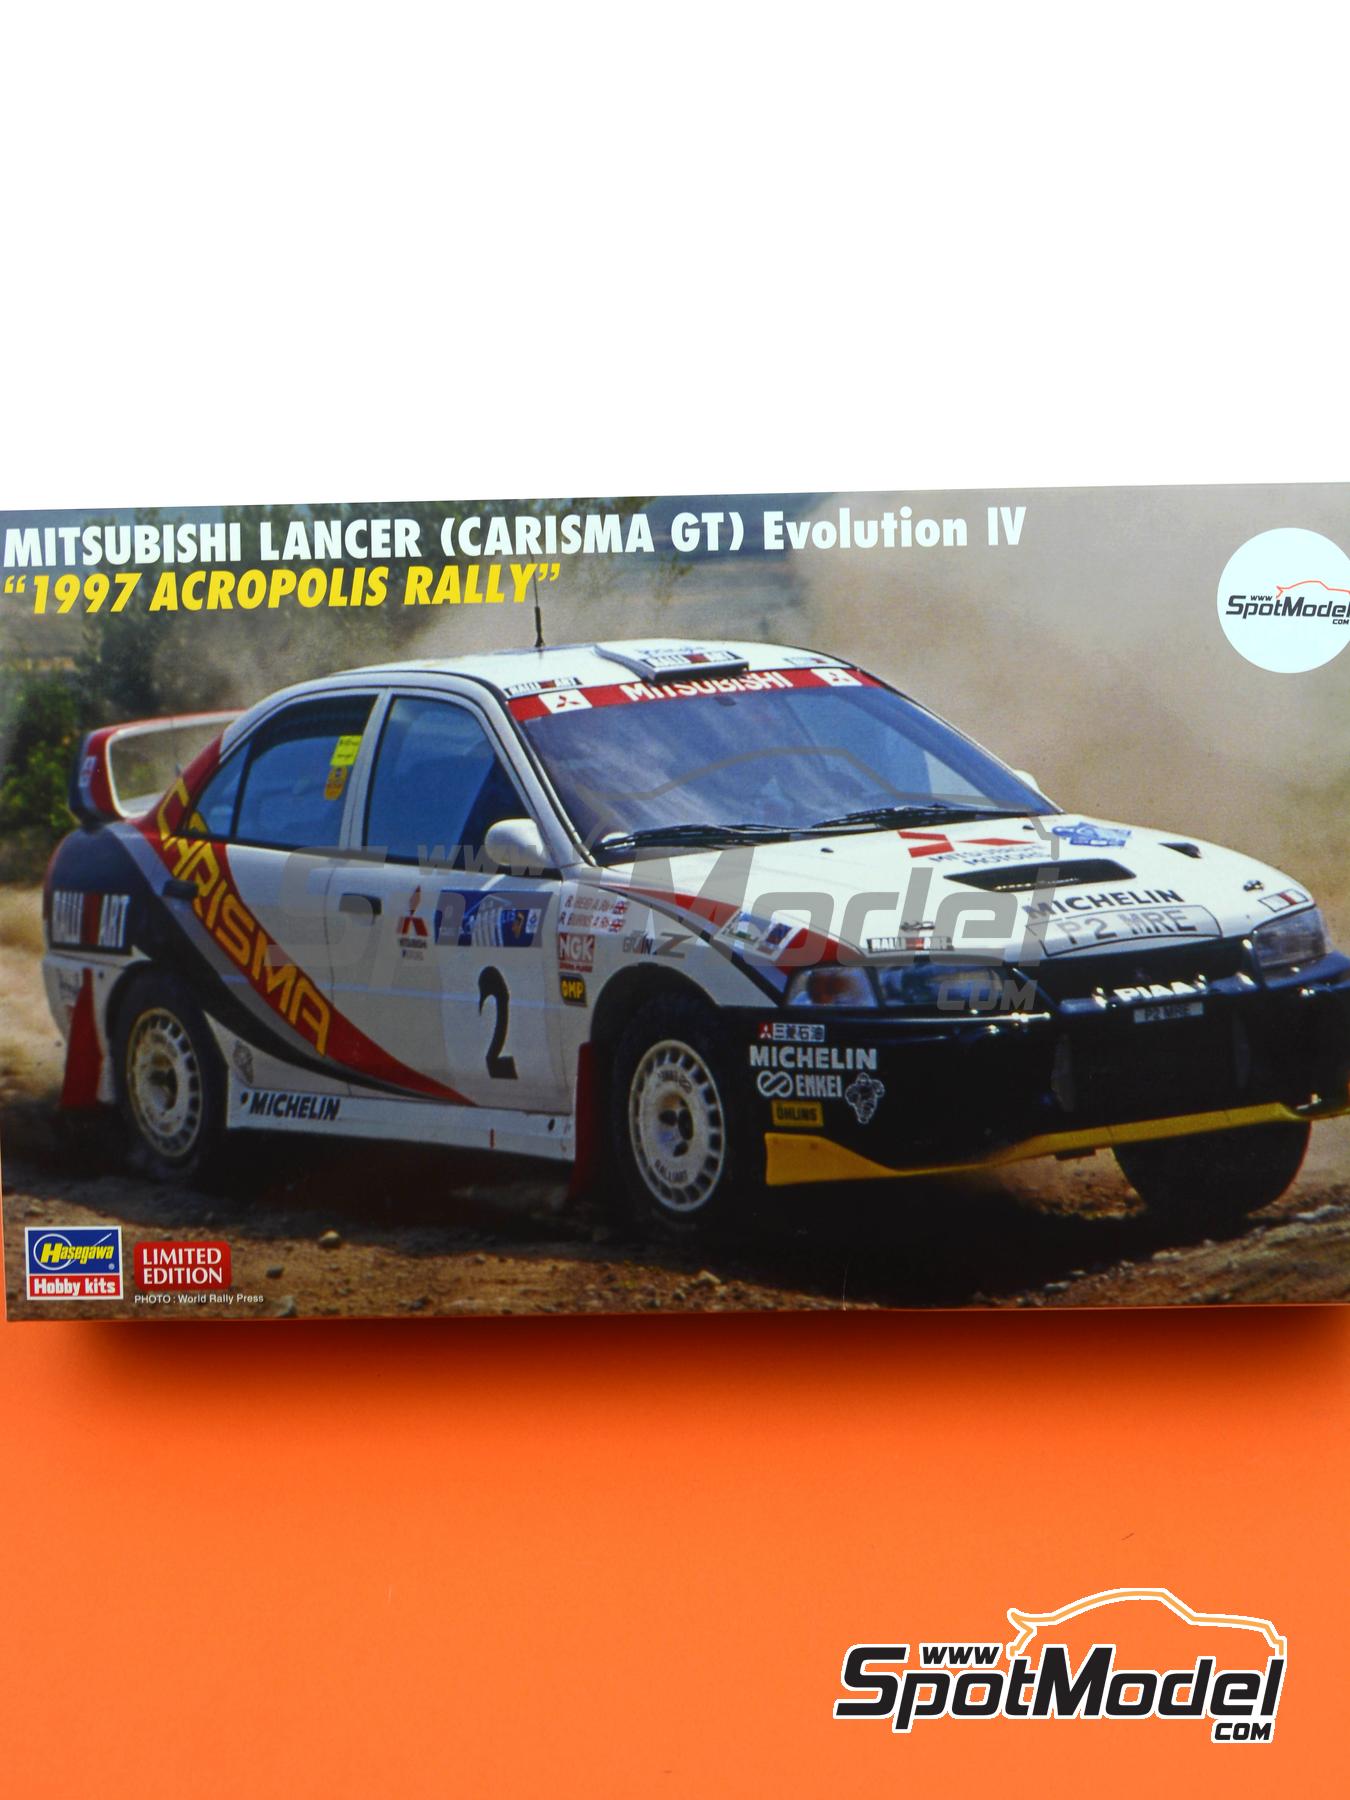 Mitsubishi Lancer (Carisma GT) Evolution IV RalliArt Team - Acropolis Rally  1997. Car scale model kit in 1/24 scale manufactured by Hasegawa (ref. 205